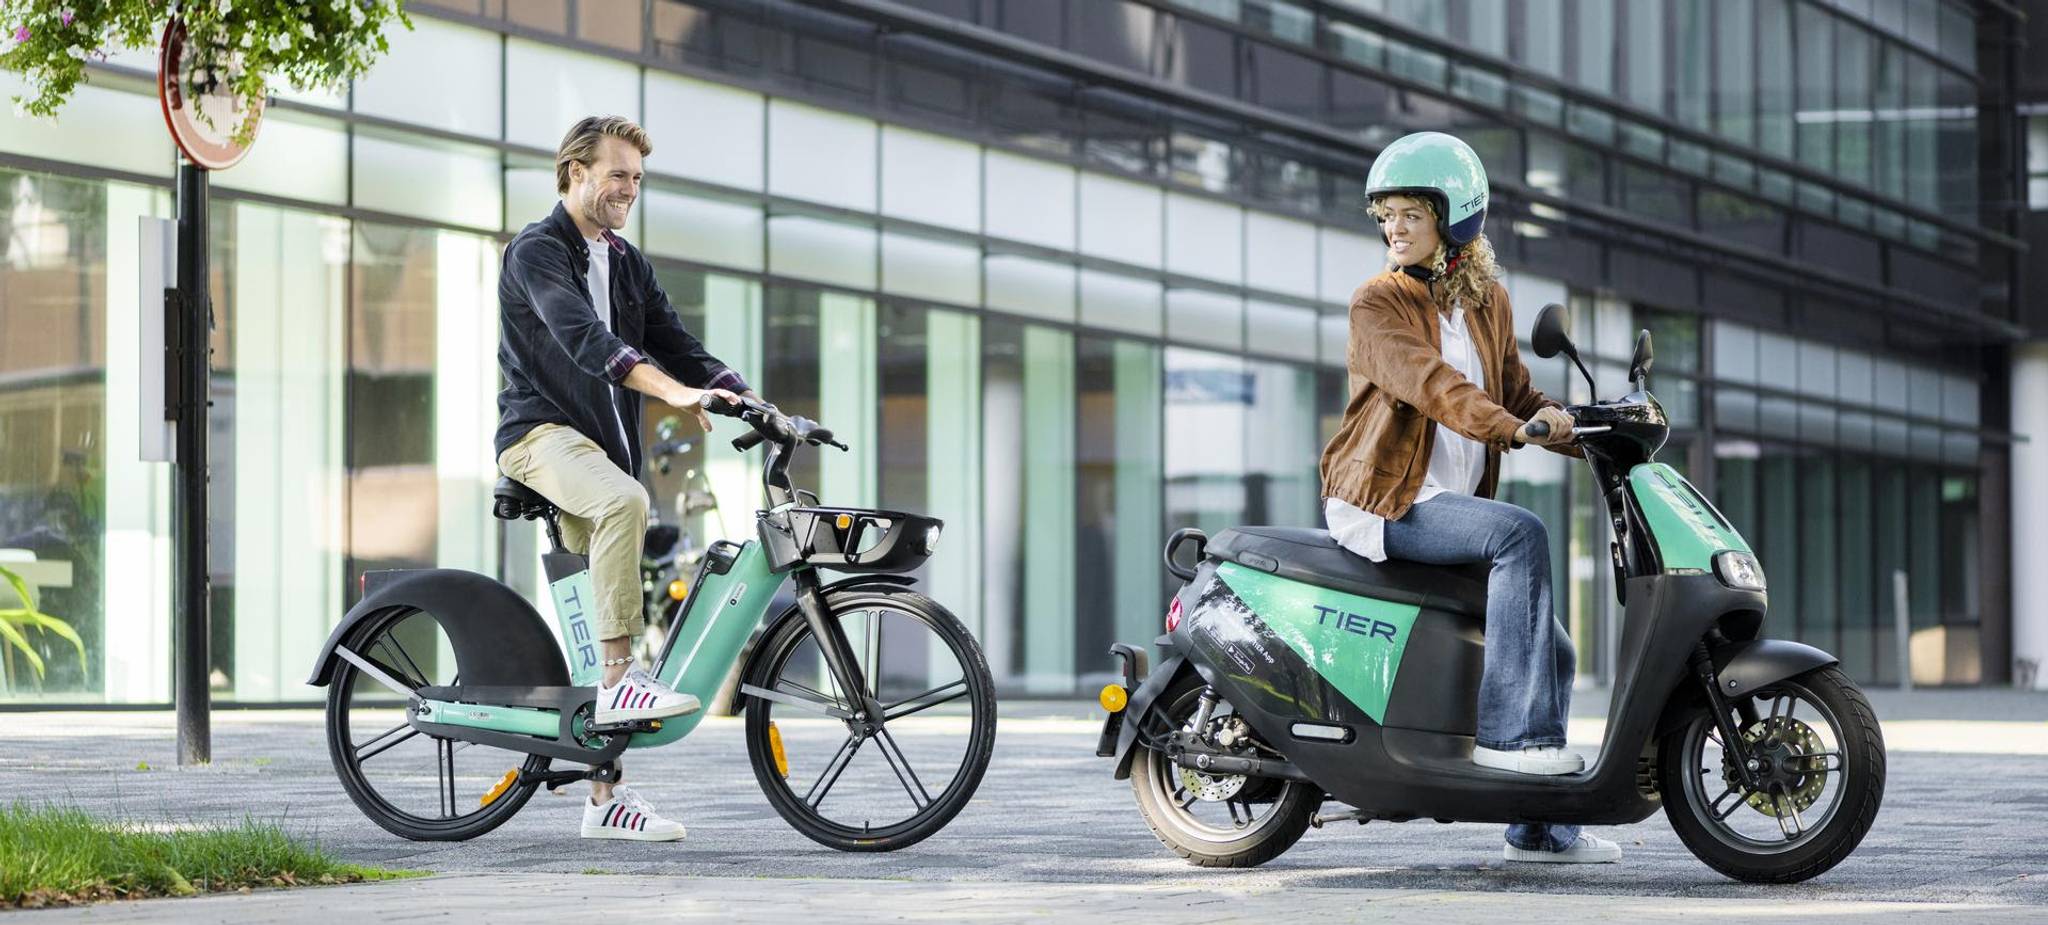 TIER: improving city life with micromobility